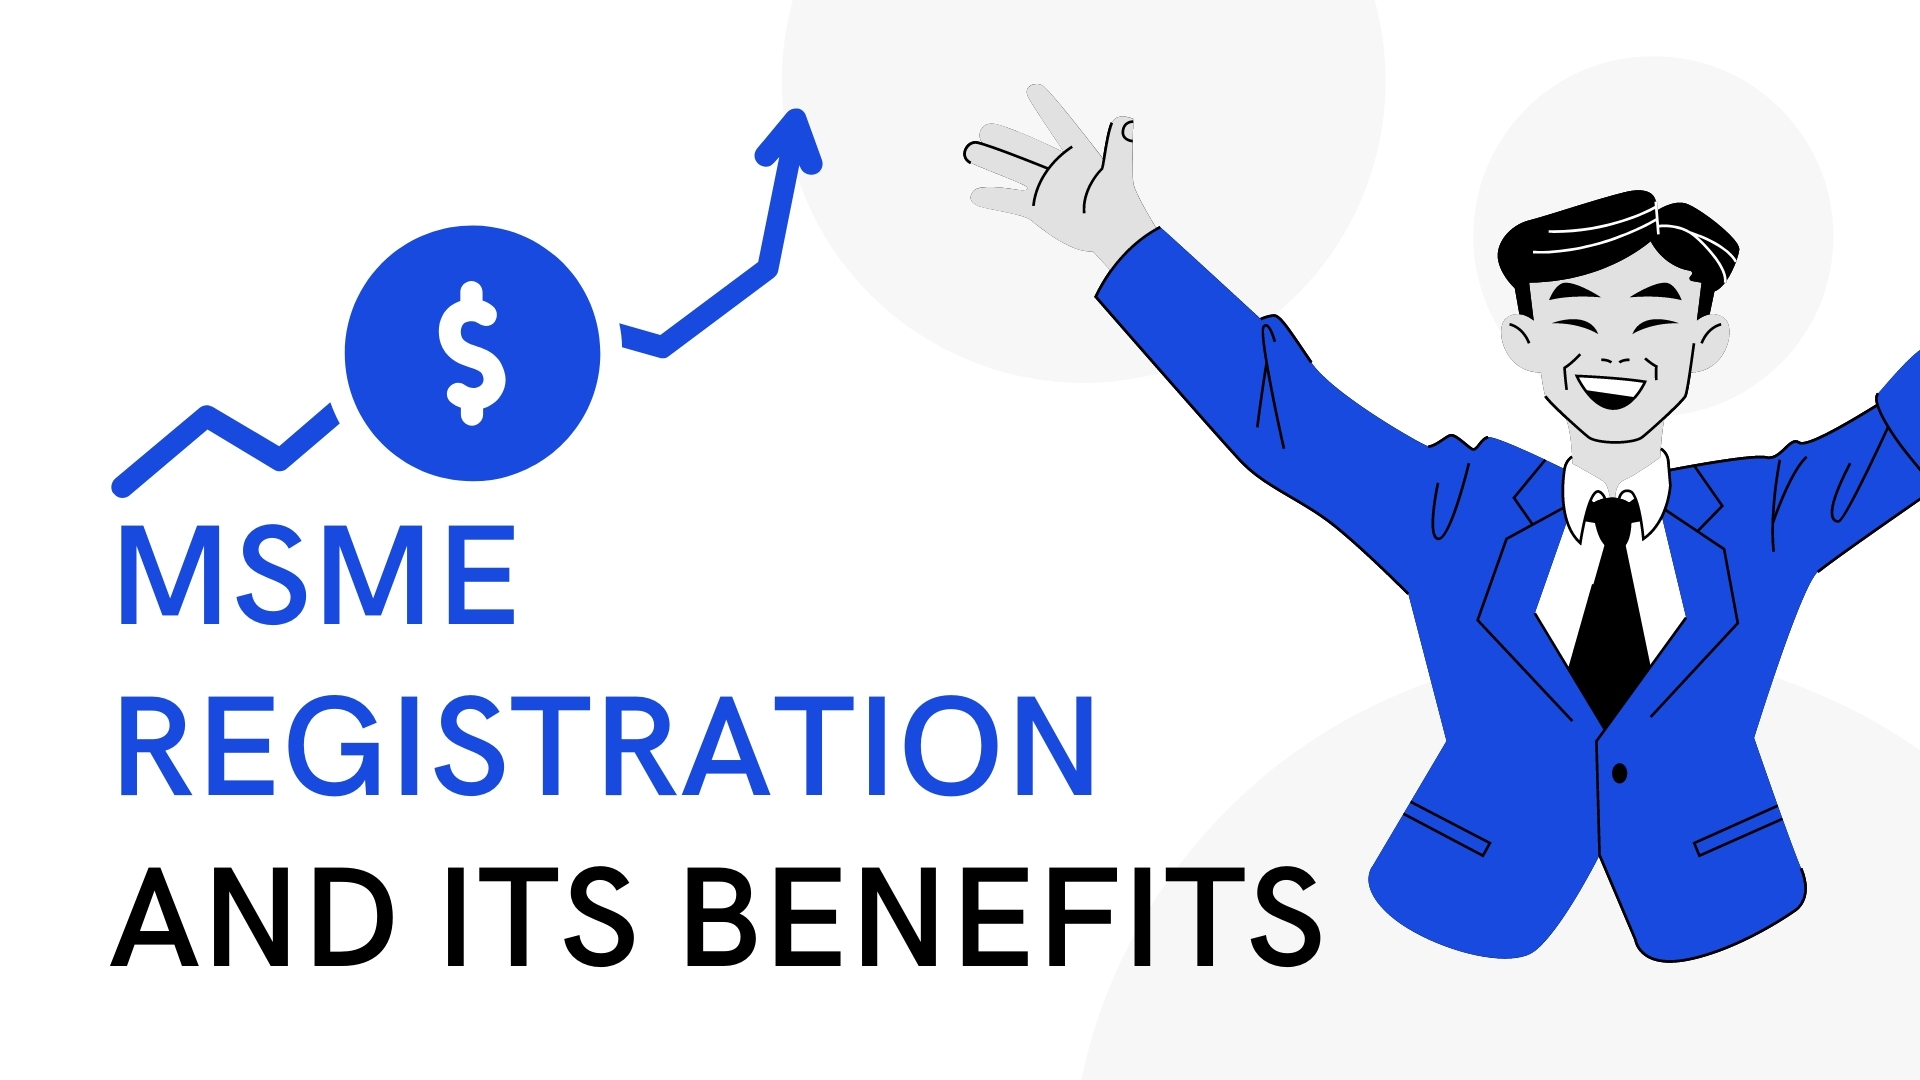 MSME Registration and its Benefits